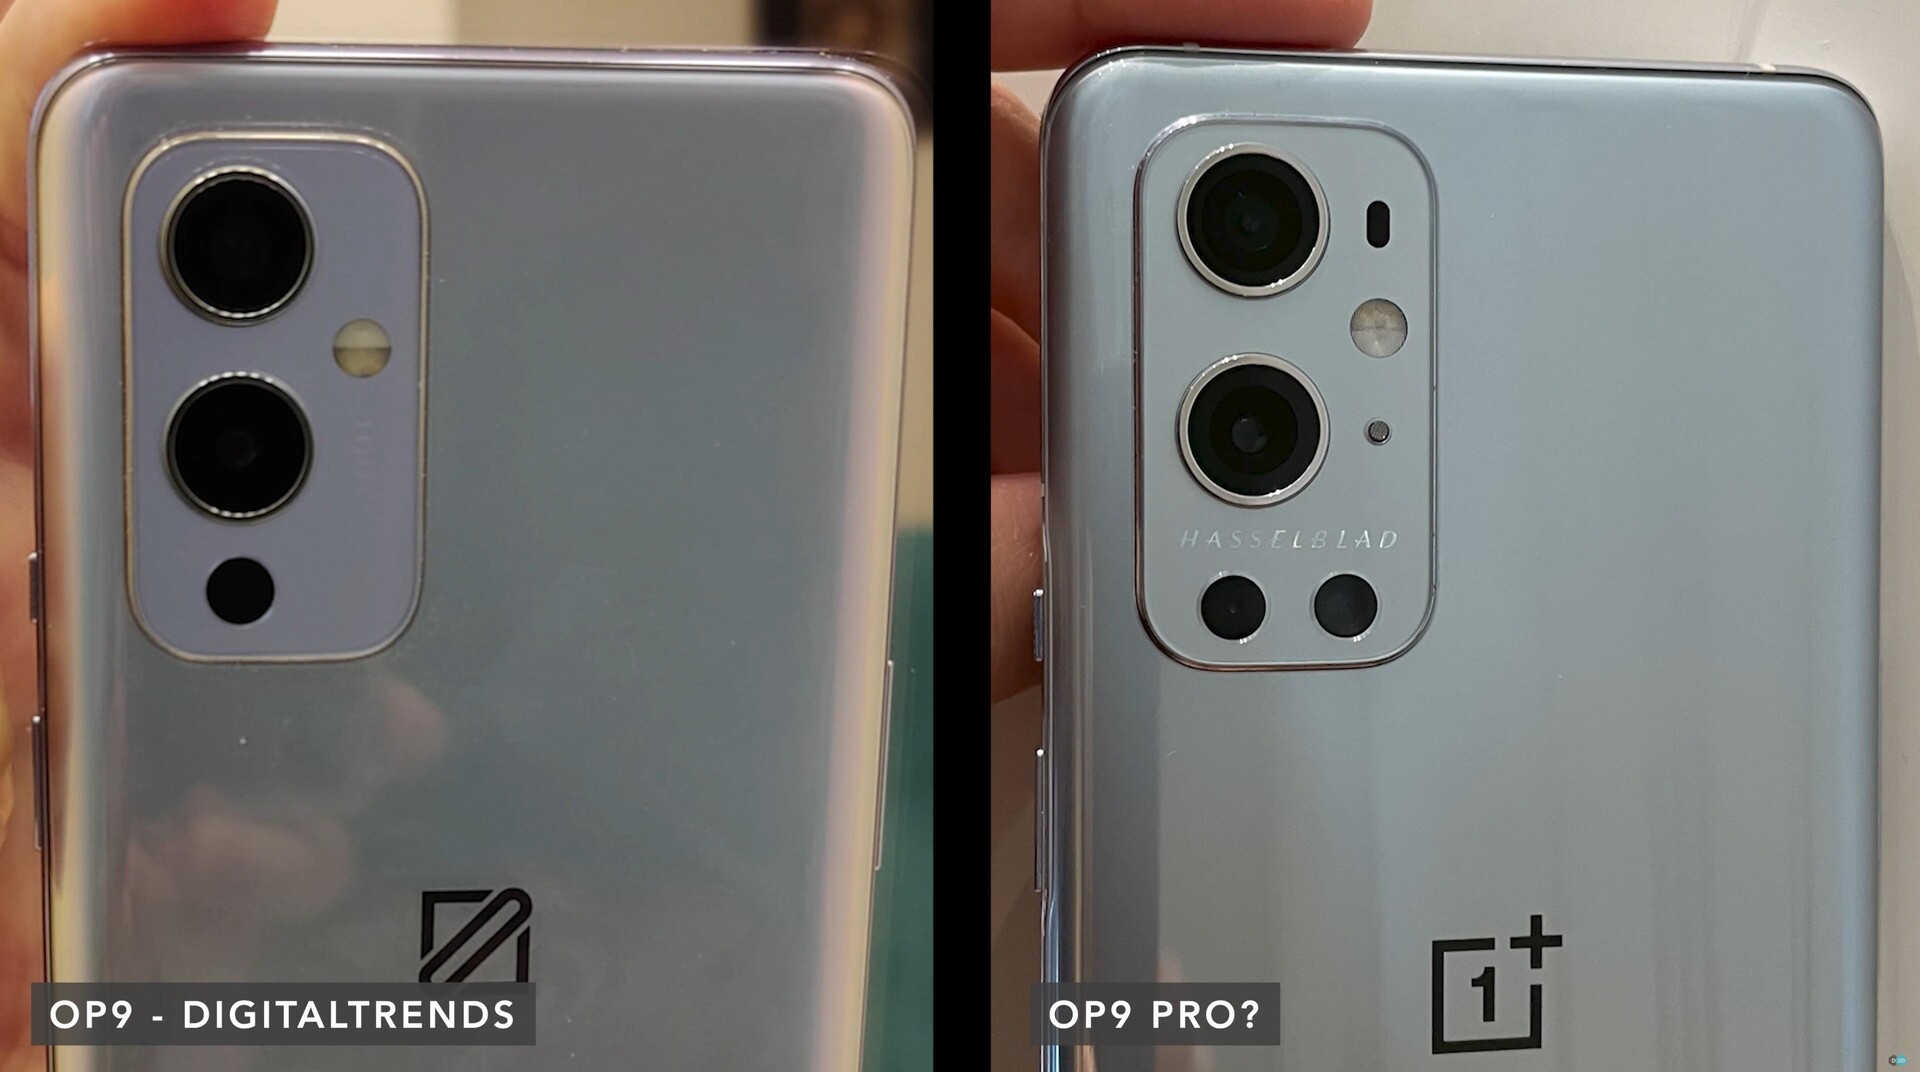 OnePlus 9 Pro real image leaks for the first time 